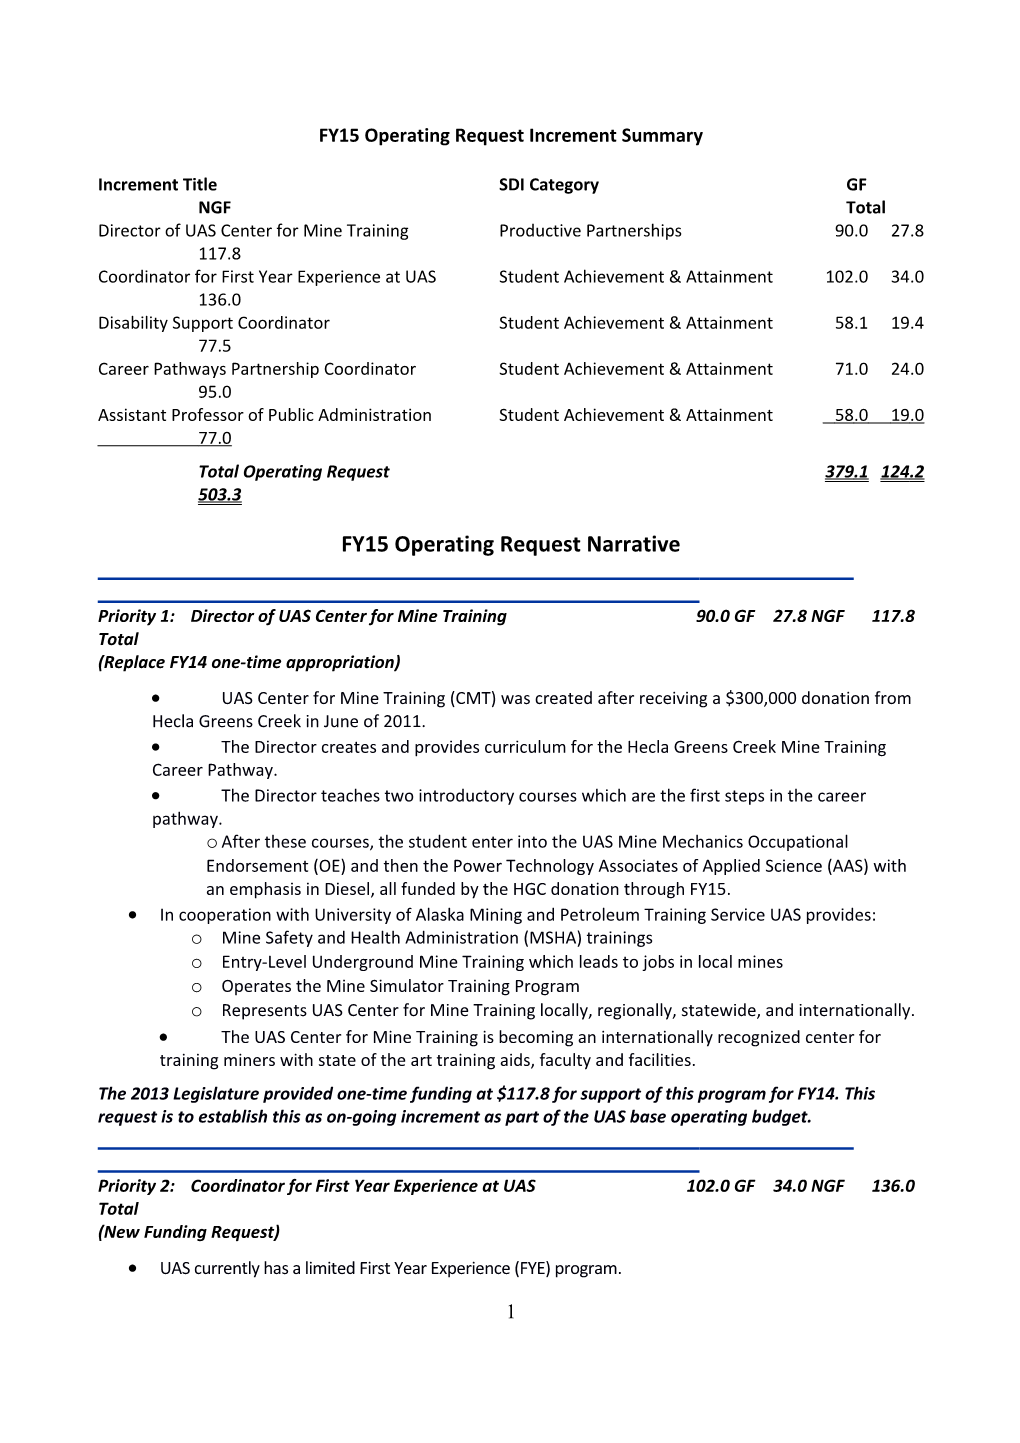 FY15 Operating Request Increment Summary